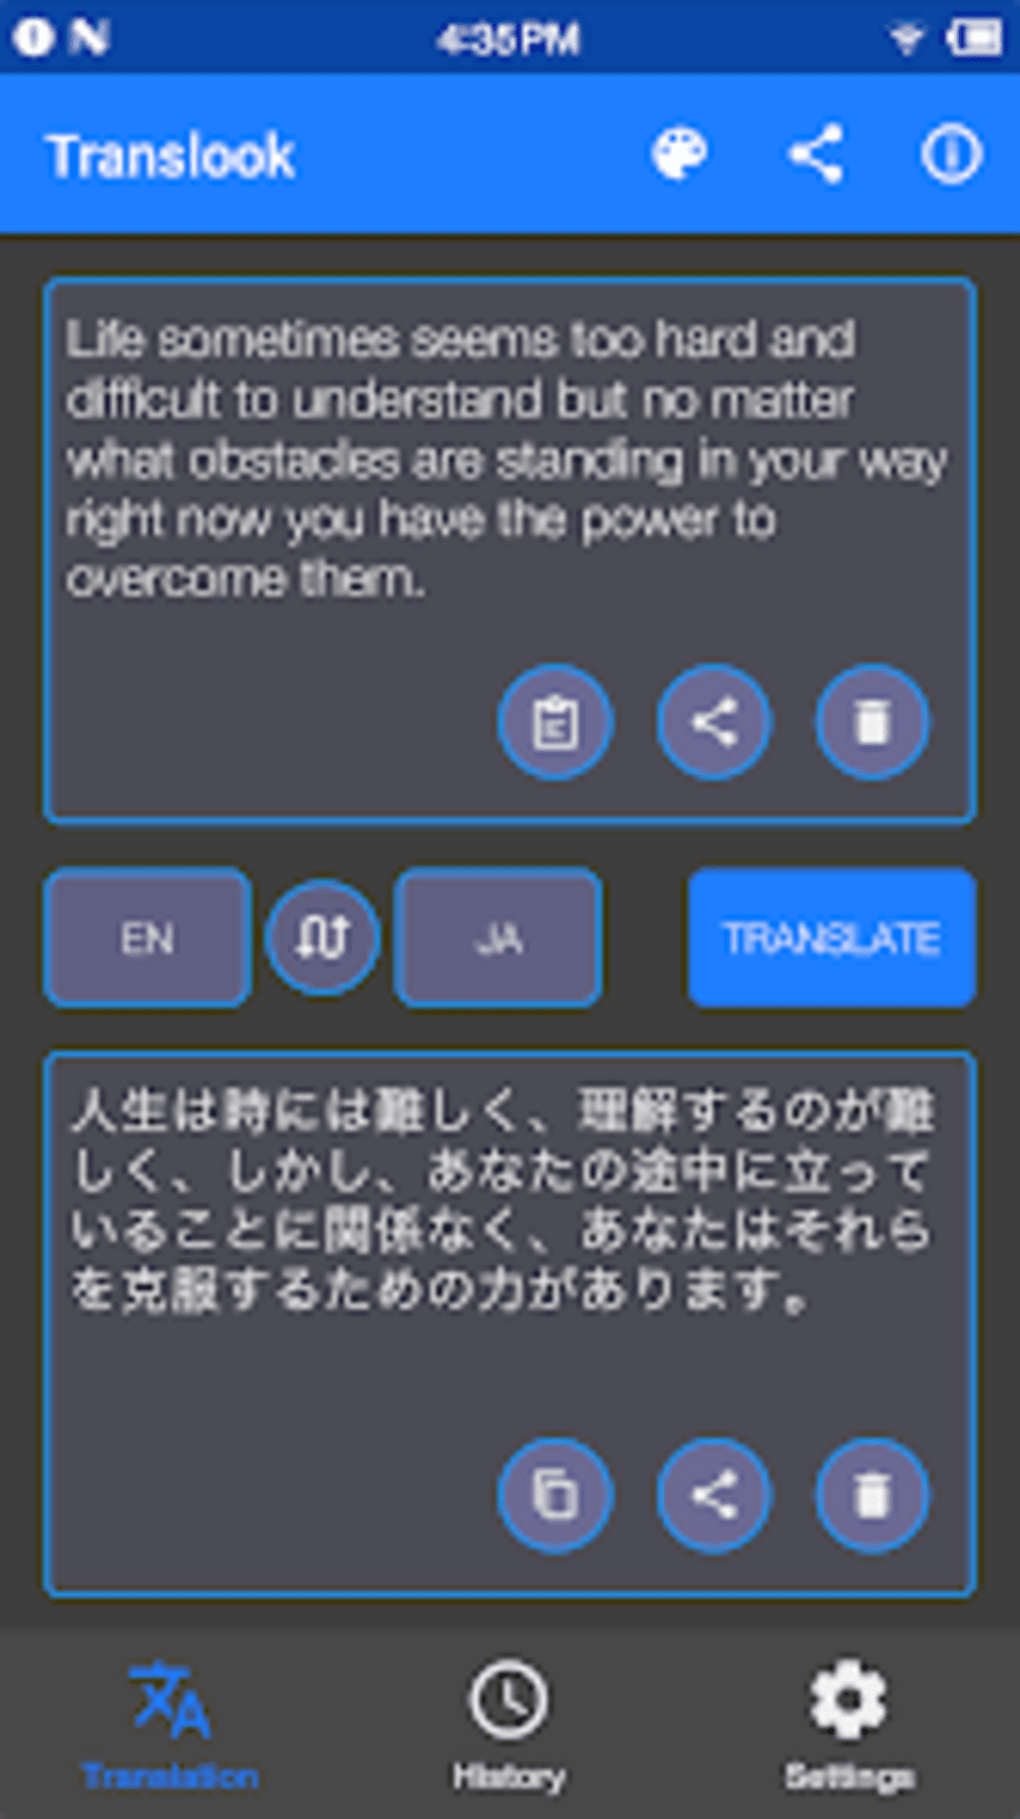 Translook - Translate Language for Android - Download